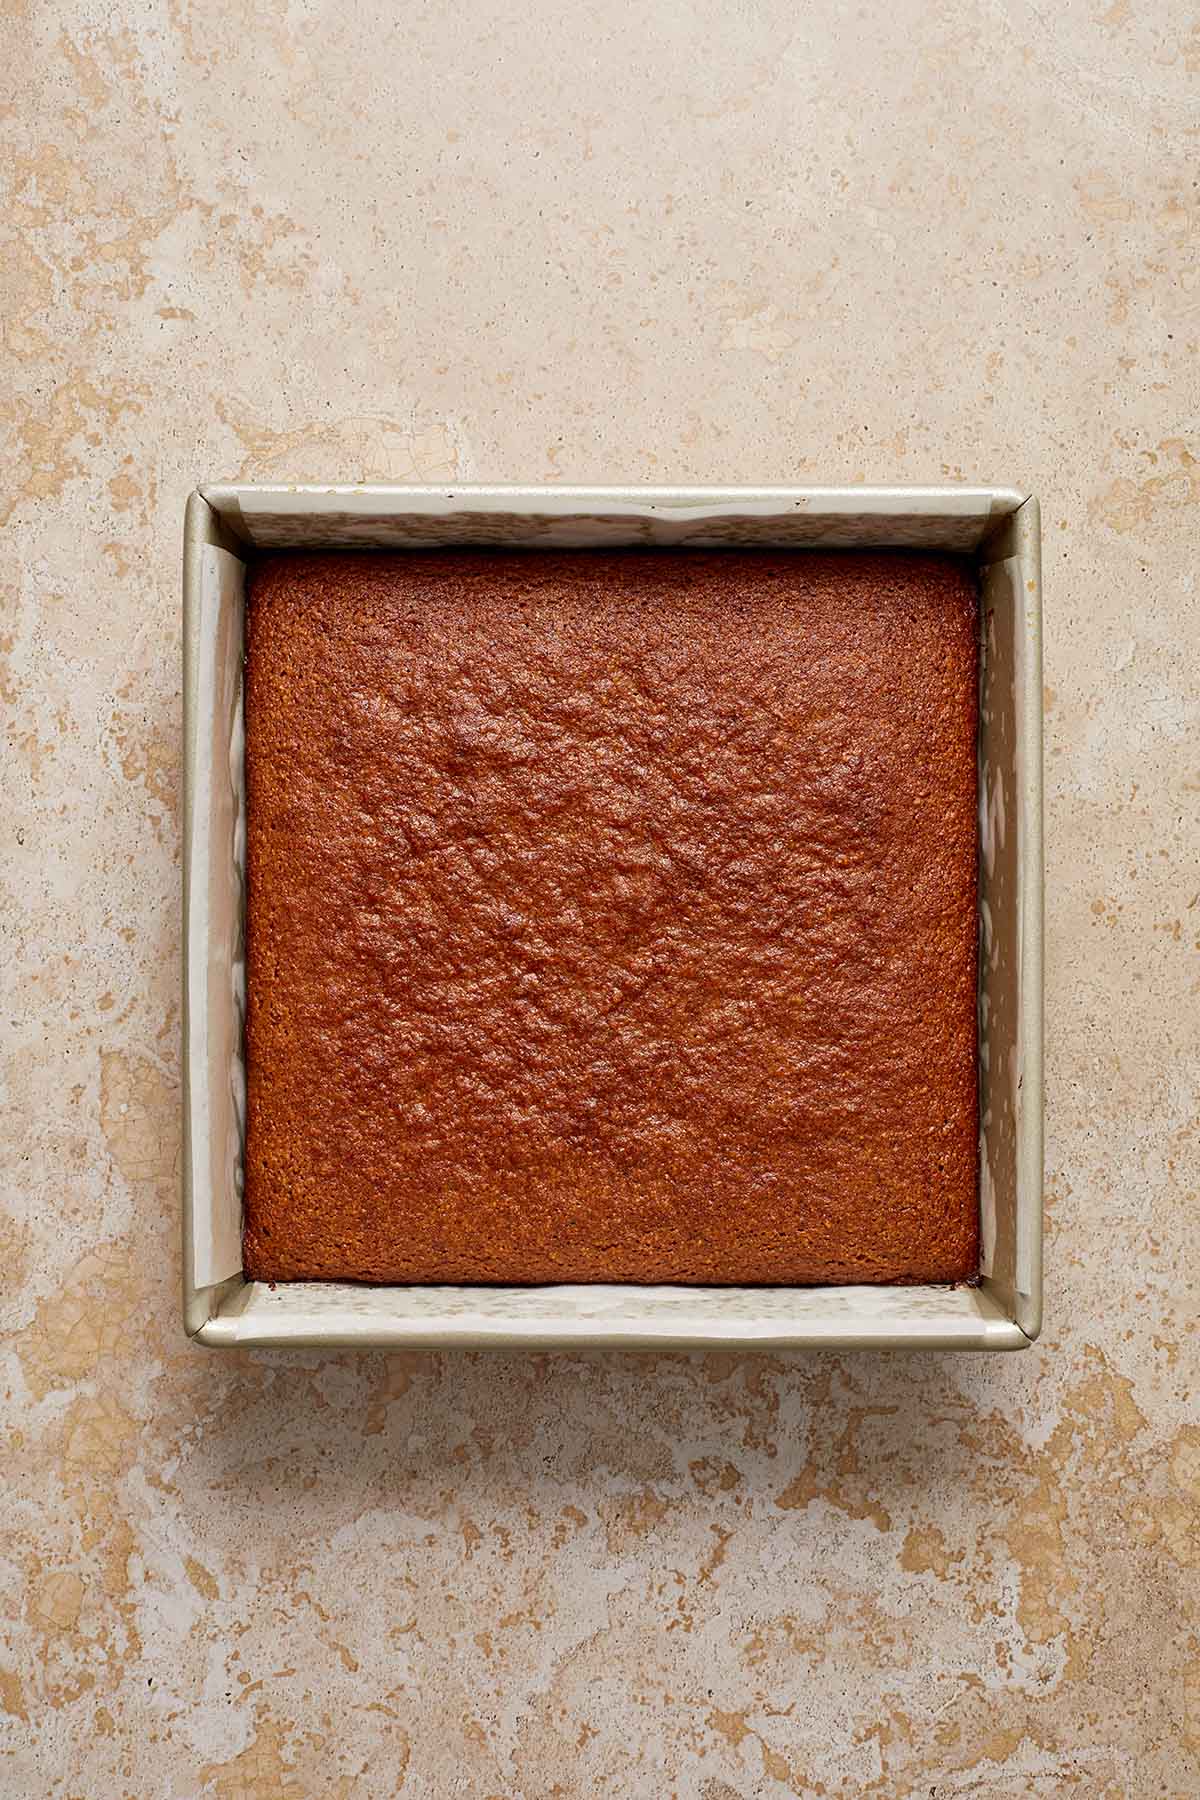 Cake baked in square pan.